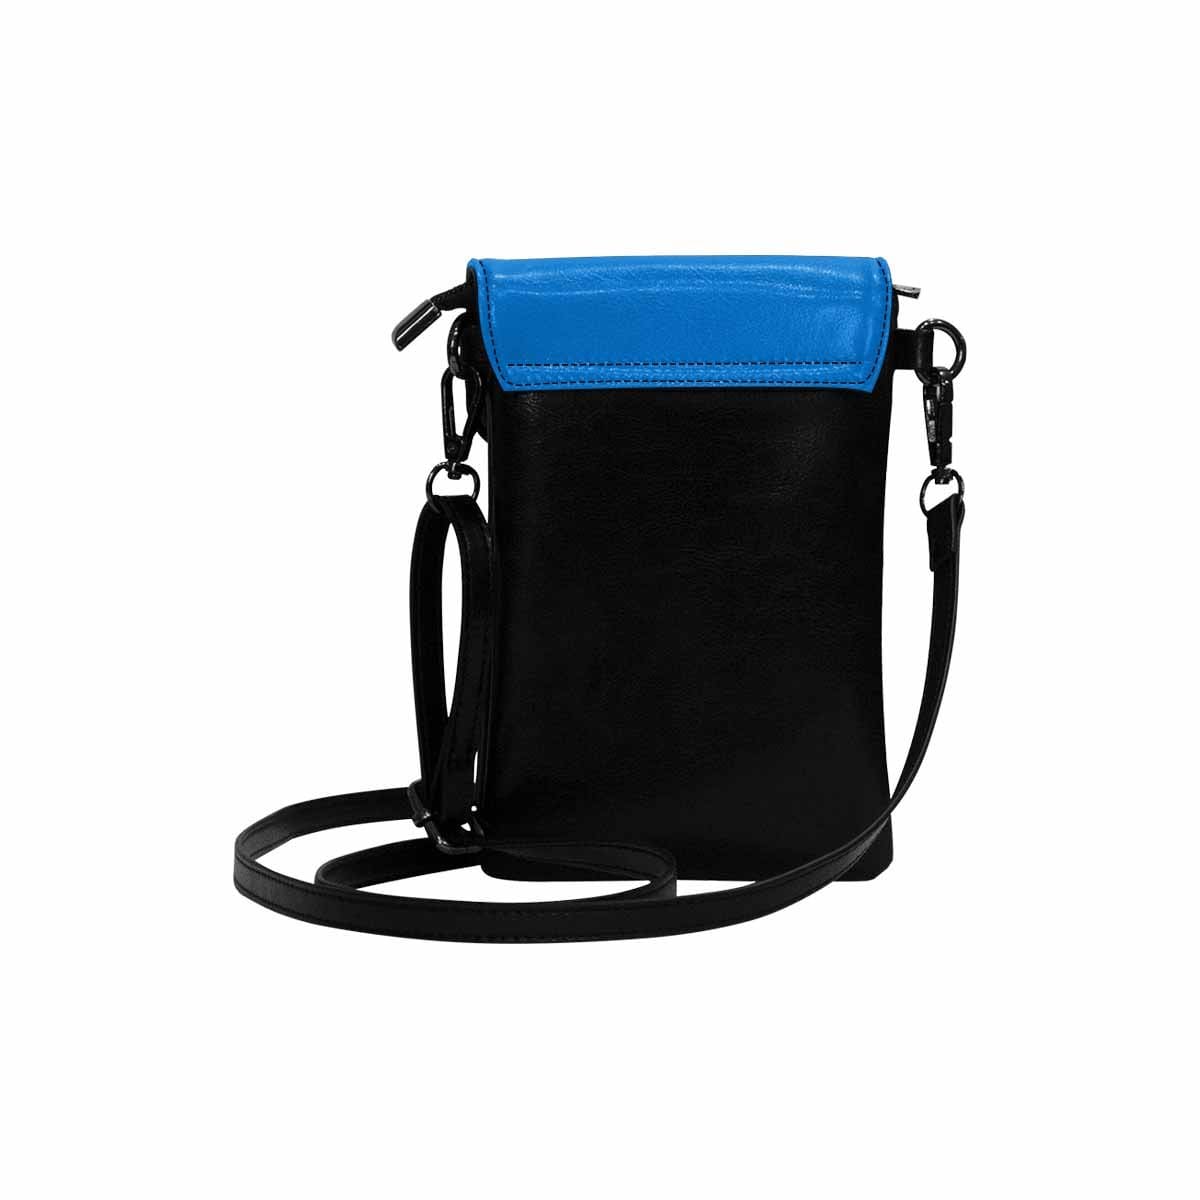 Womens Cell Phone Purse Blue Grotto - Bags | Wallets | Phone Cases